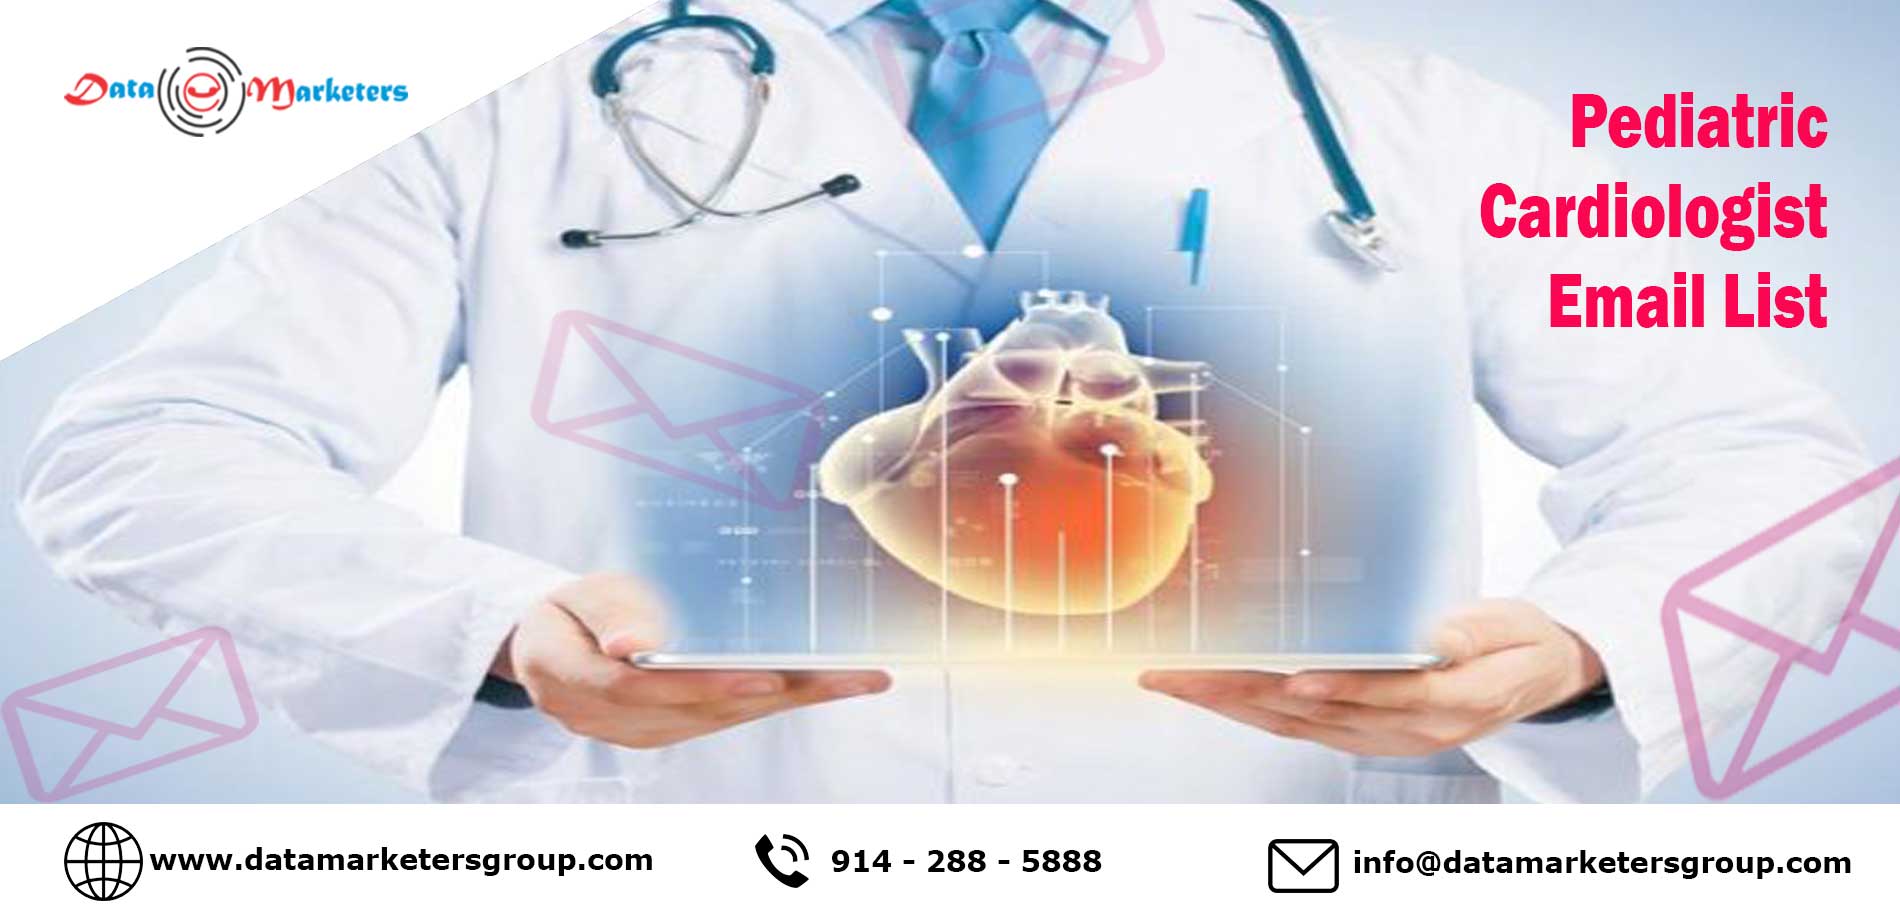 Pediatric Cardiologist Email List | Data Marketers Group